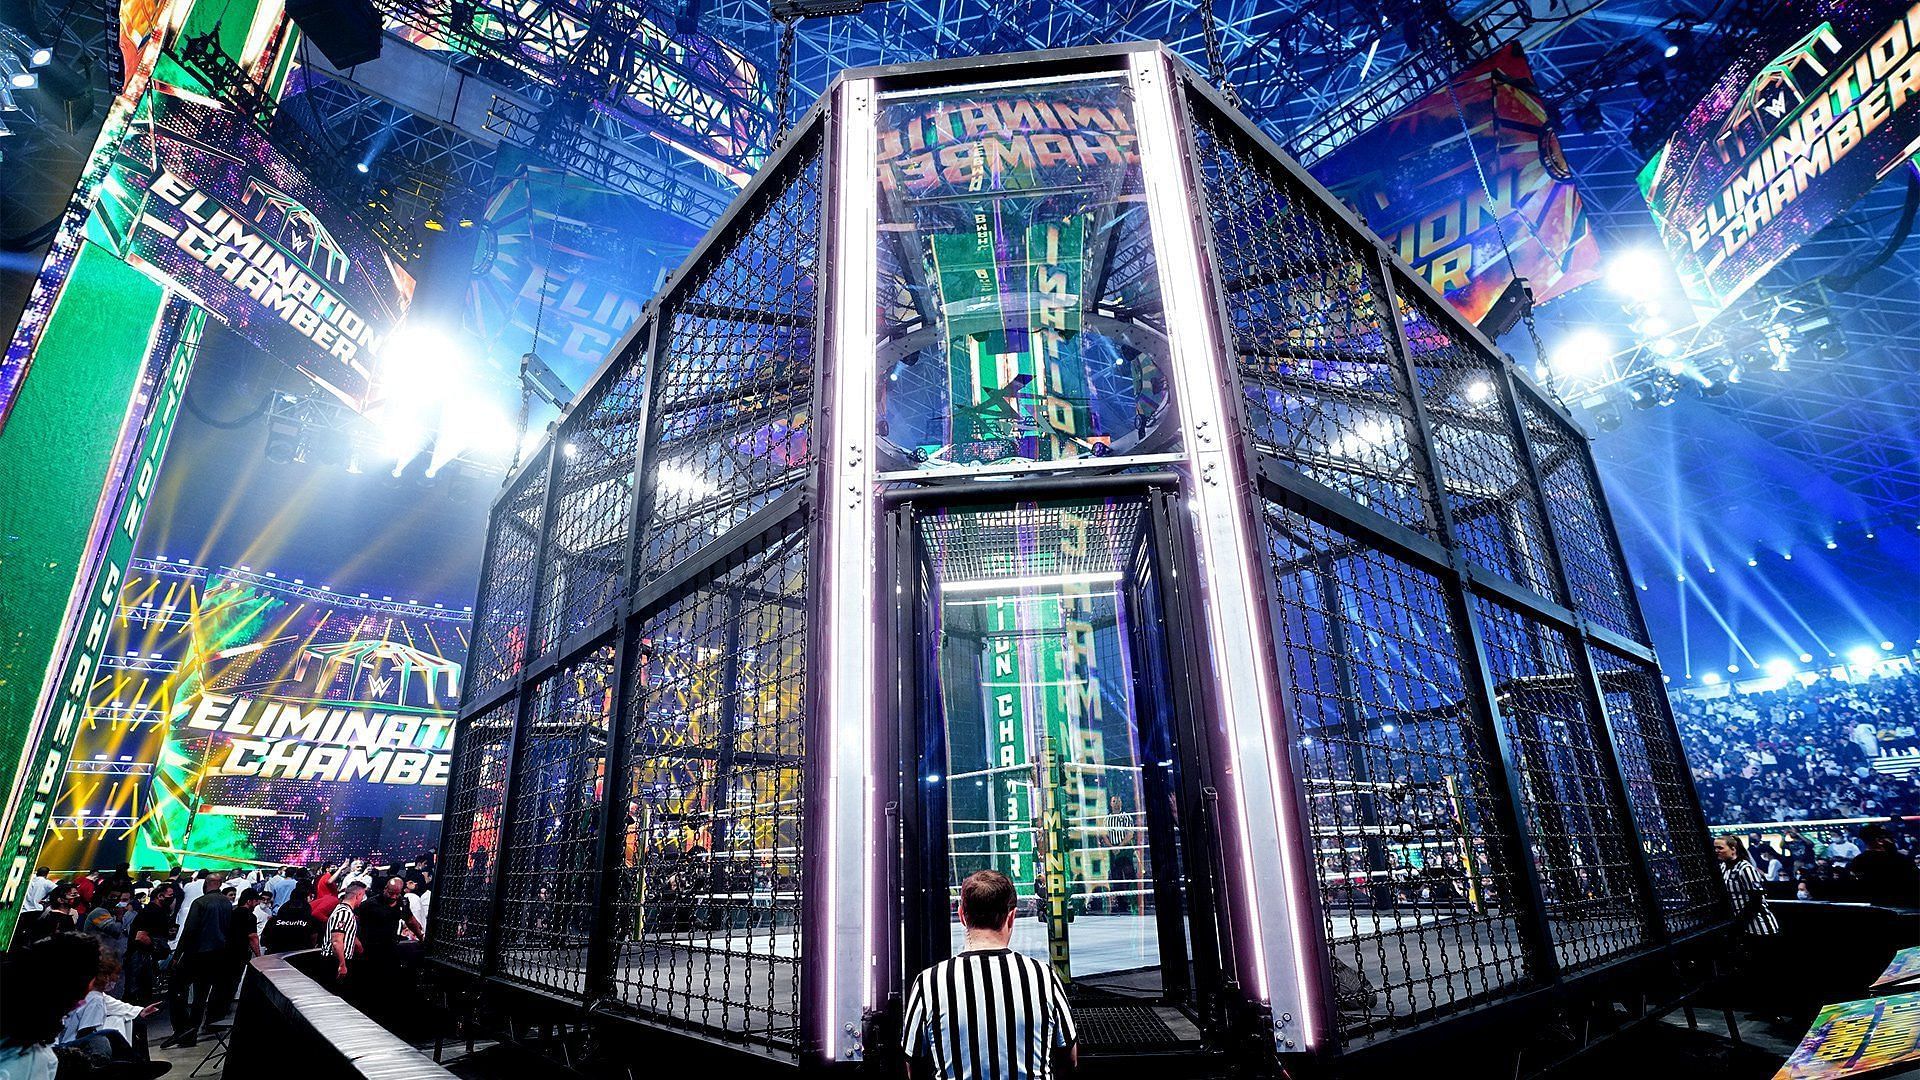 The front door to the WWE Elimination Chamber structure